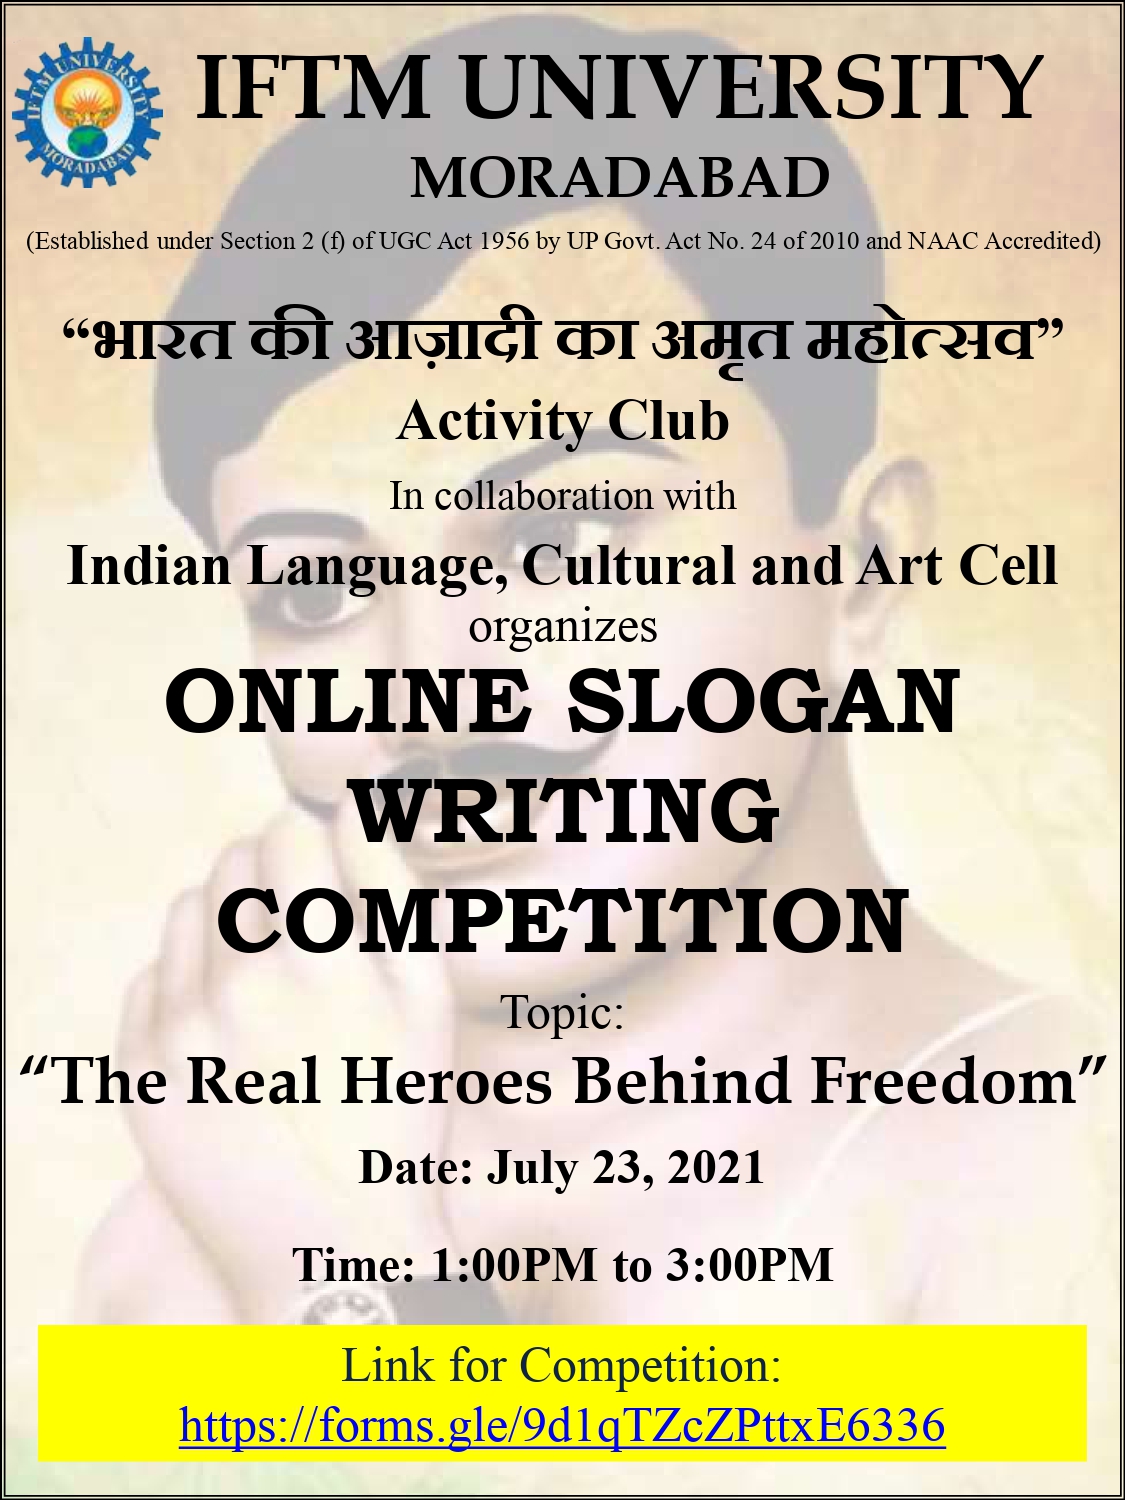 Online Slogan Writing Competition on Topic: The Real Heroes Behind Freedom.